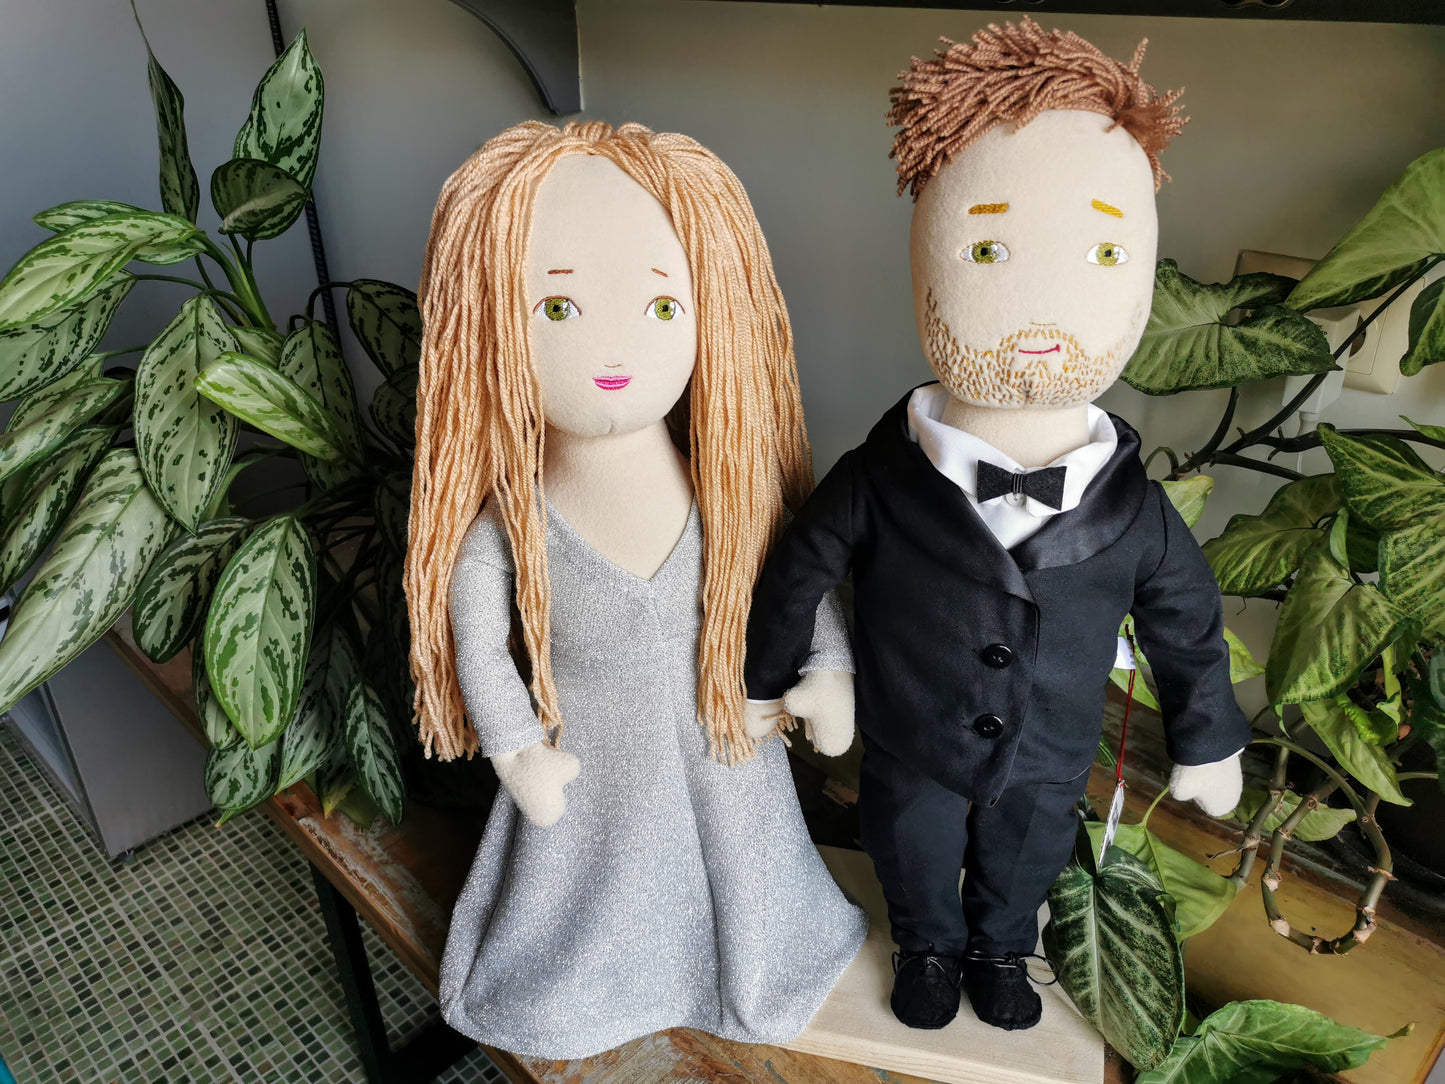 Custom Dolls from Wedding to Plush, 2 dolls of Bride and Groom, replica of wedding day couple photos